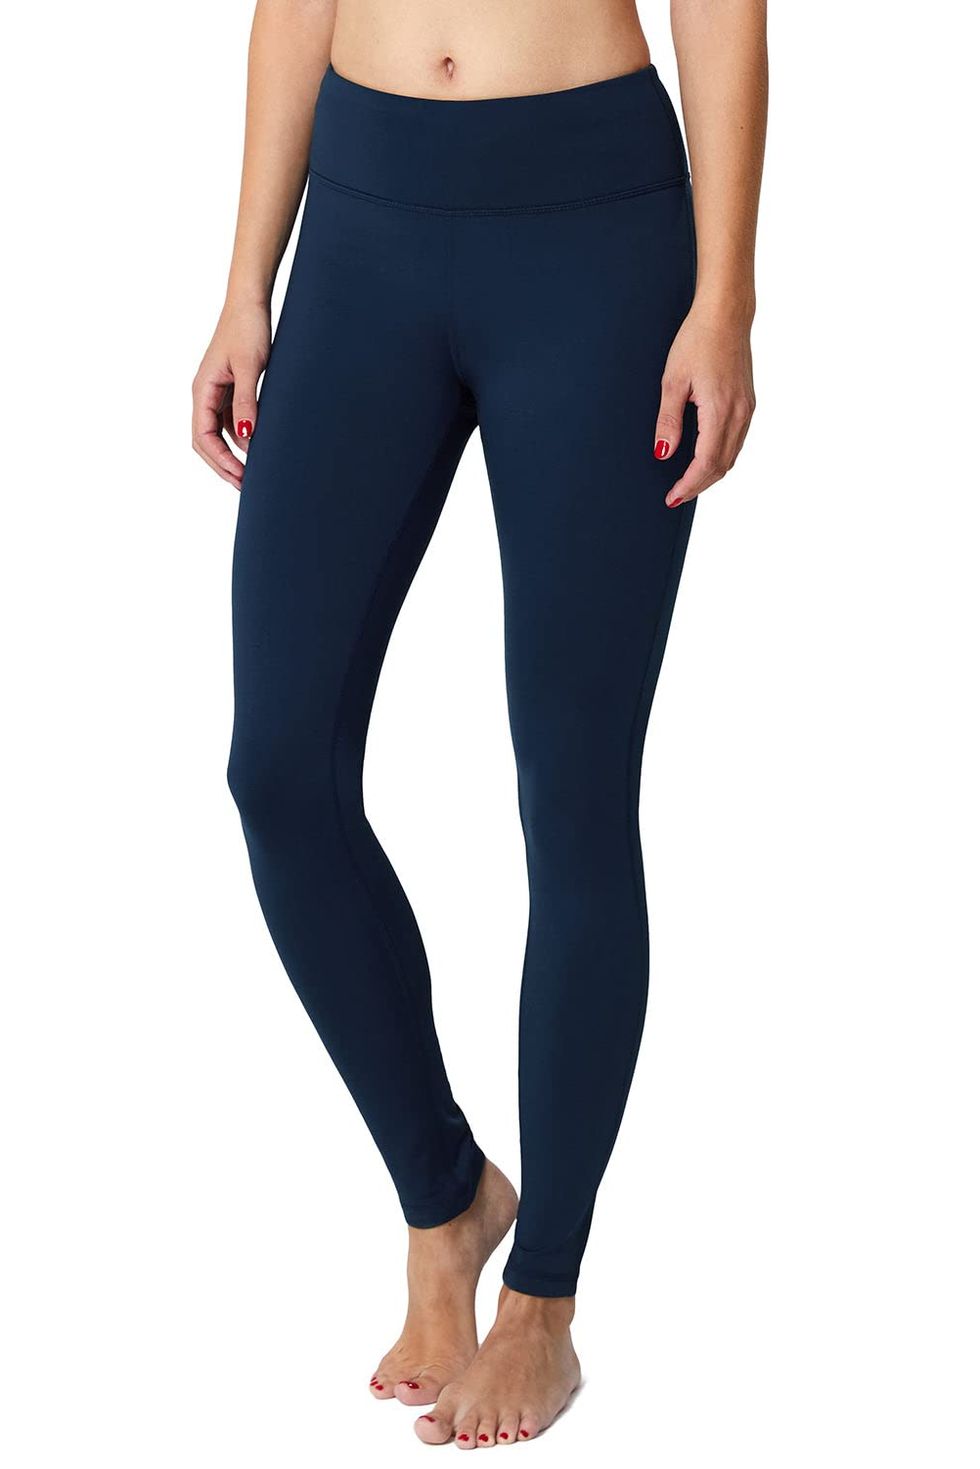 Navy Fleece Lined Leggings  Outfits with leggings, Blue leggings outfit,  Light blue leggings outfit